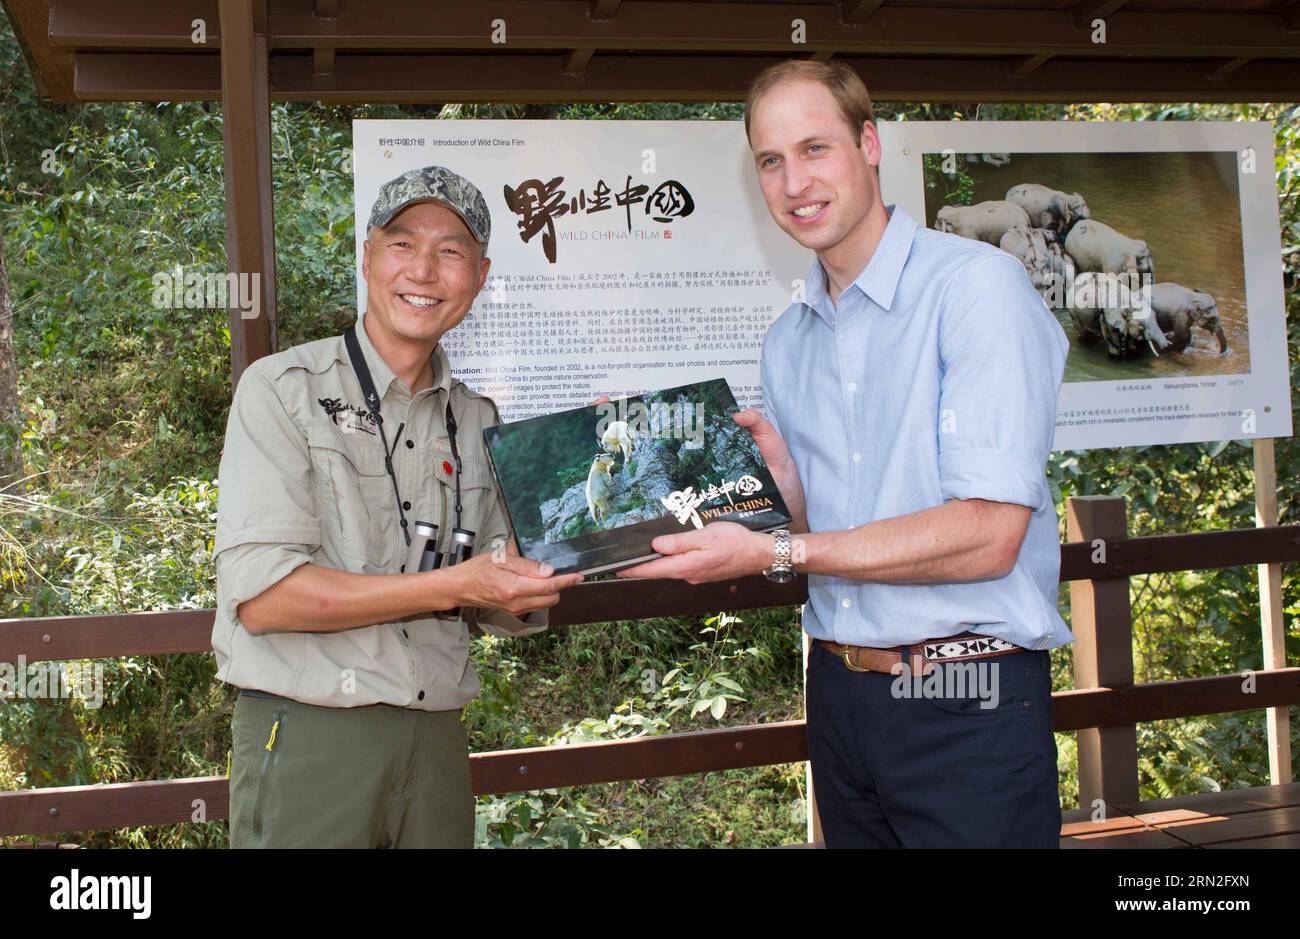 XISHUANGBANNA, March 4, 2015 -- Britain s Prince William (R) poses for photos with Xi Zhinong from Wild China Film and his photo album during the Wild China photo exhibition held at Xishuangbanna National Nature Reserve in Xishuangbanna Dai Autonomous Region, southwest China s Yunnan Province, March 4, 2015. ) (wyo) CHINA-YUNNAN-PRINCE WILLIAM-VISIT(CN) MaxJinzhong PUBLICATIONxNOTxINxCHN   Xishuangbanna March 4 2015 Britain S Prince William r Poses for Photos With Xi  from Wild China Film and His Photo Album during The Wild China Photo Exhibition Hero AT Xishuangbanna National Nature Reserve i Stock Photo